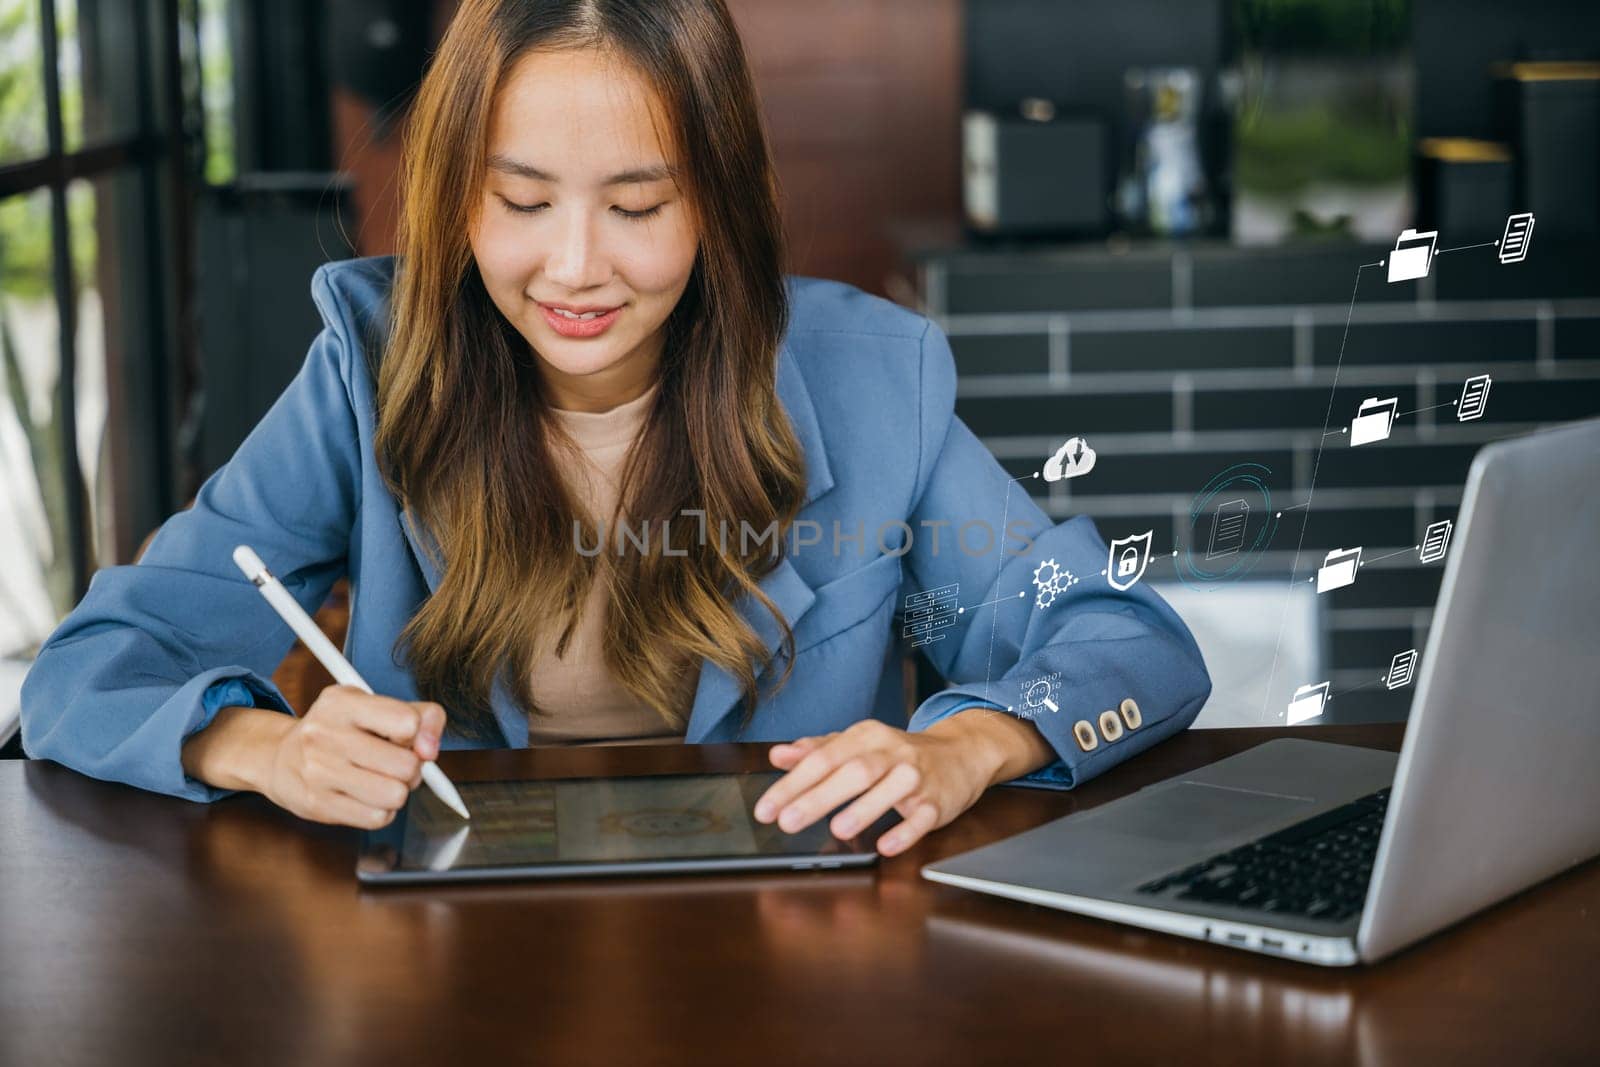 Lifestyle creative hobby woman digital artist draws a digital picture on digital tablet at cafe shop, Asian female artist illustrator painting drawing on touch pad digital tablet with stylus pen